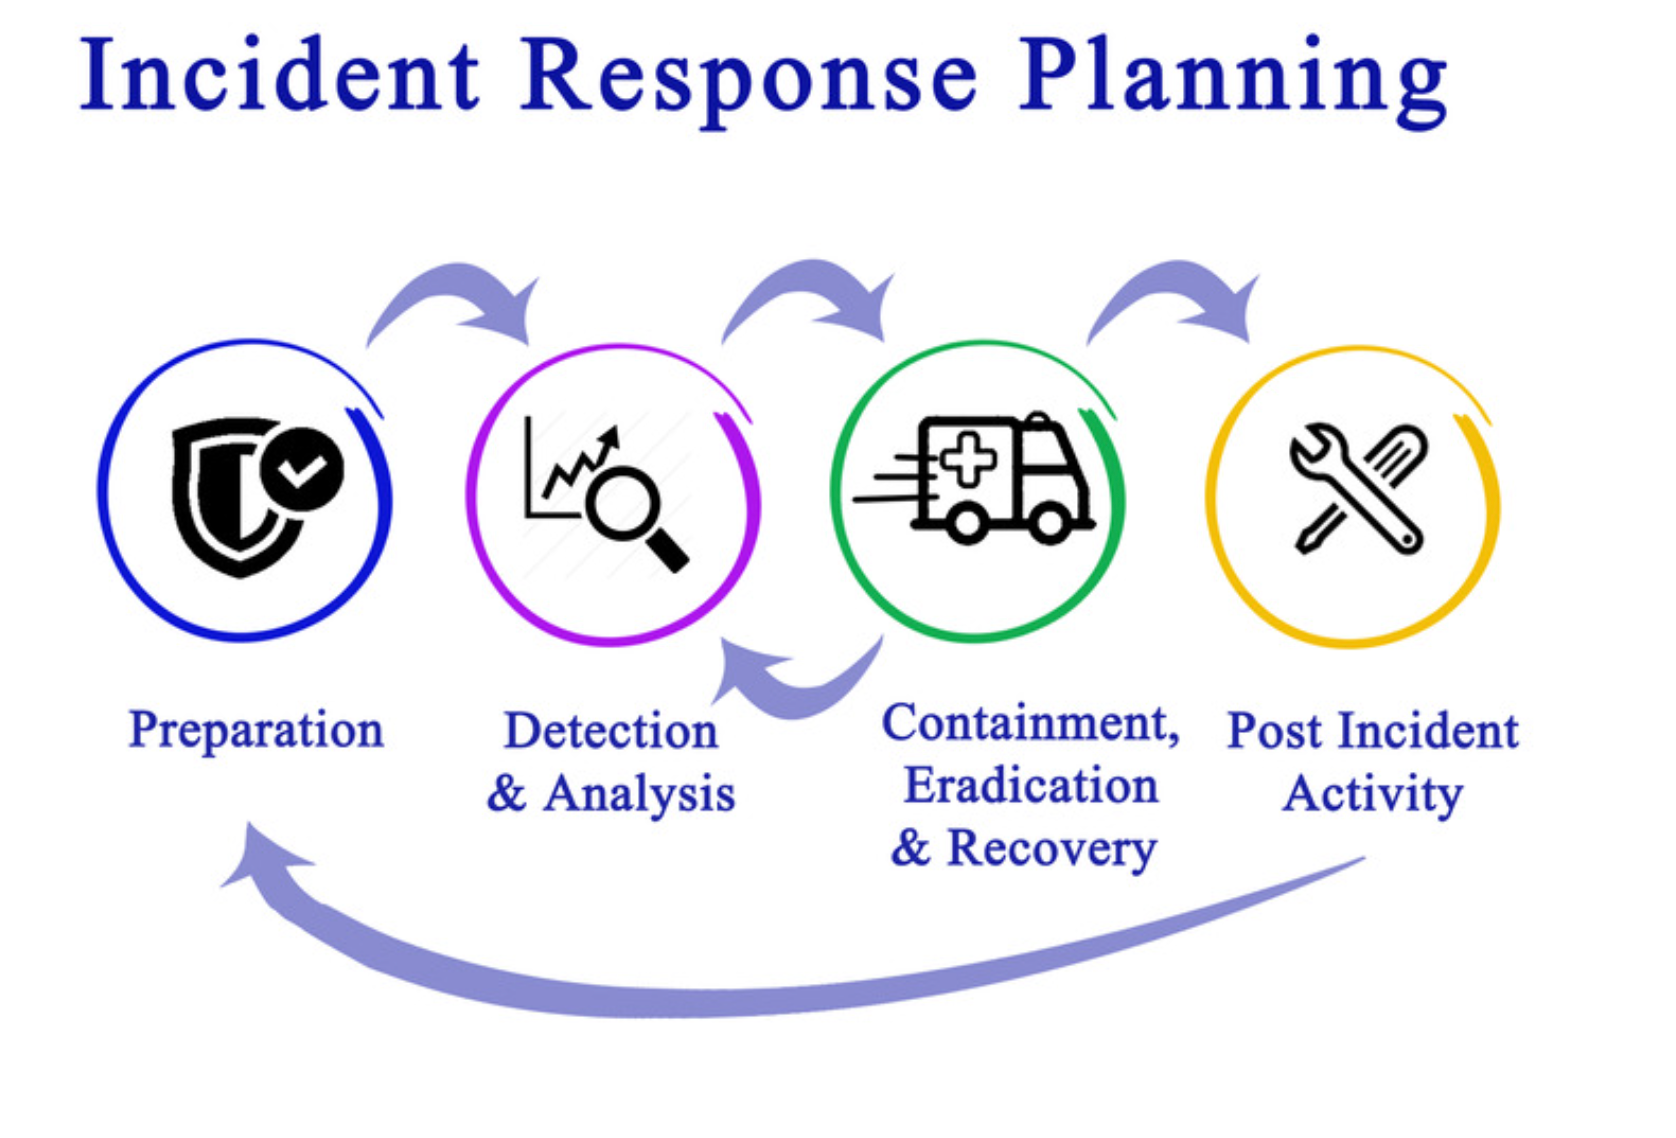 The Incident Response Planning general process flow